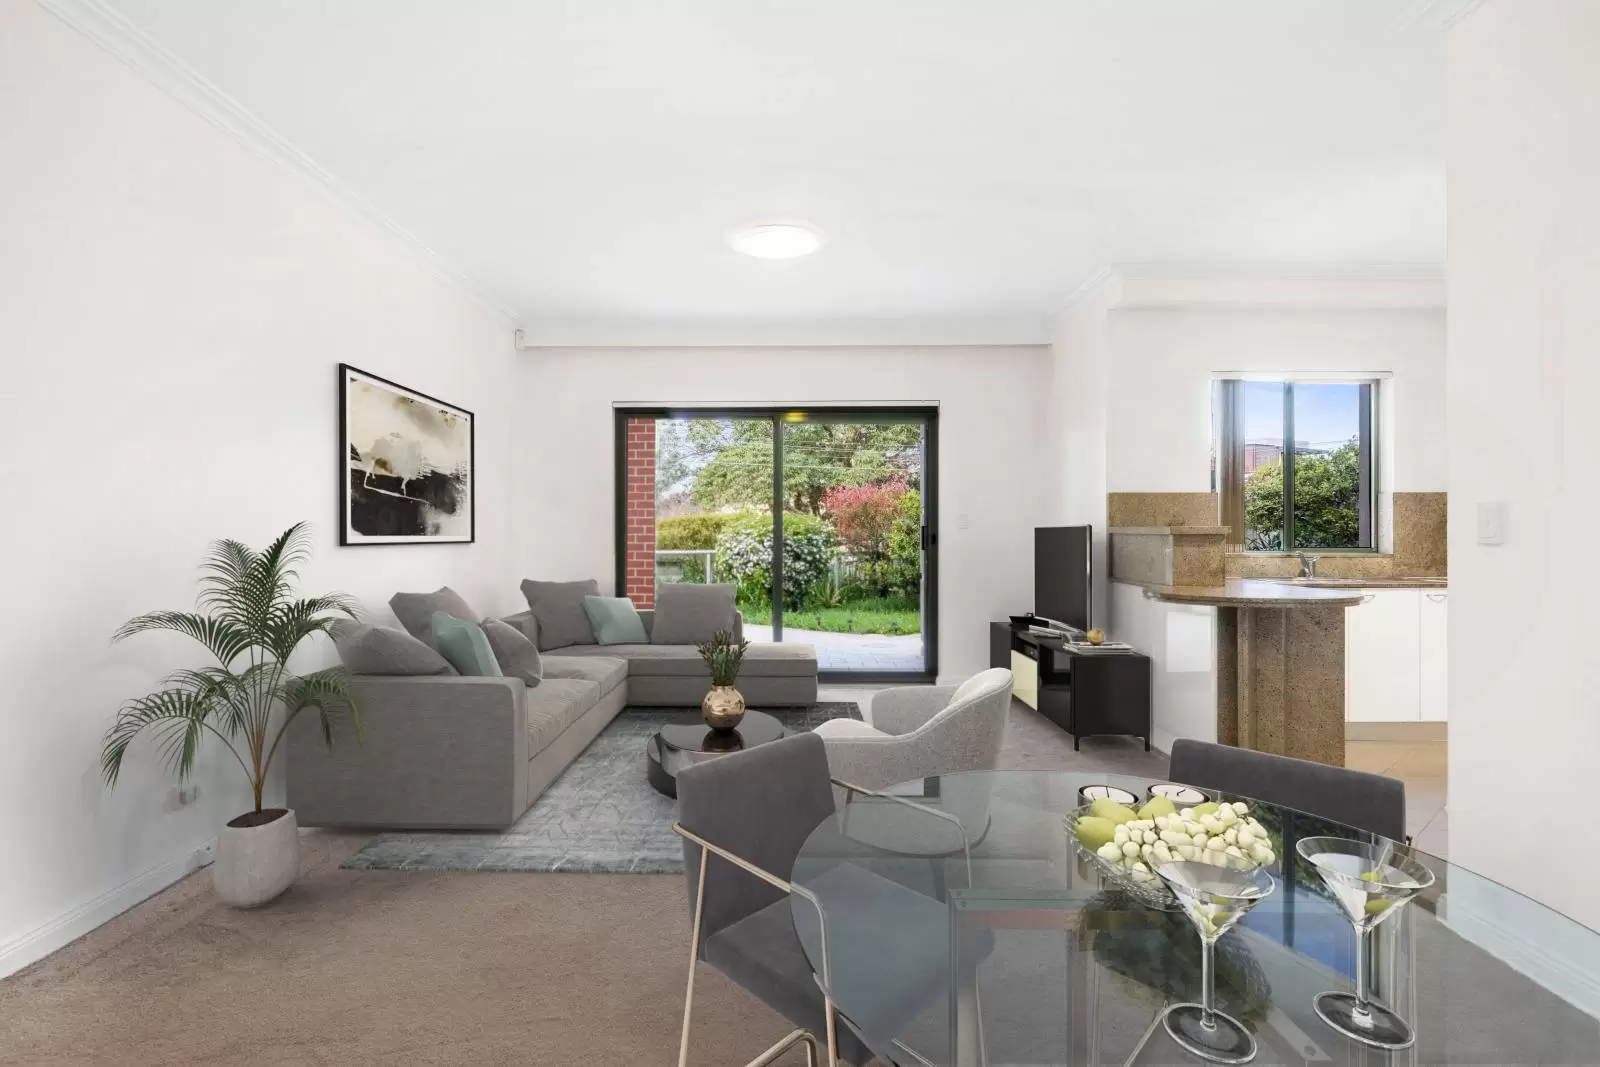 2/8 Benelong Crescent, Bellevue Hill Leased by Sydney Sotheby's International Realty - image 3